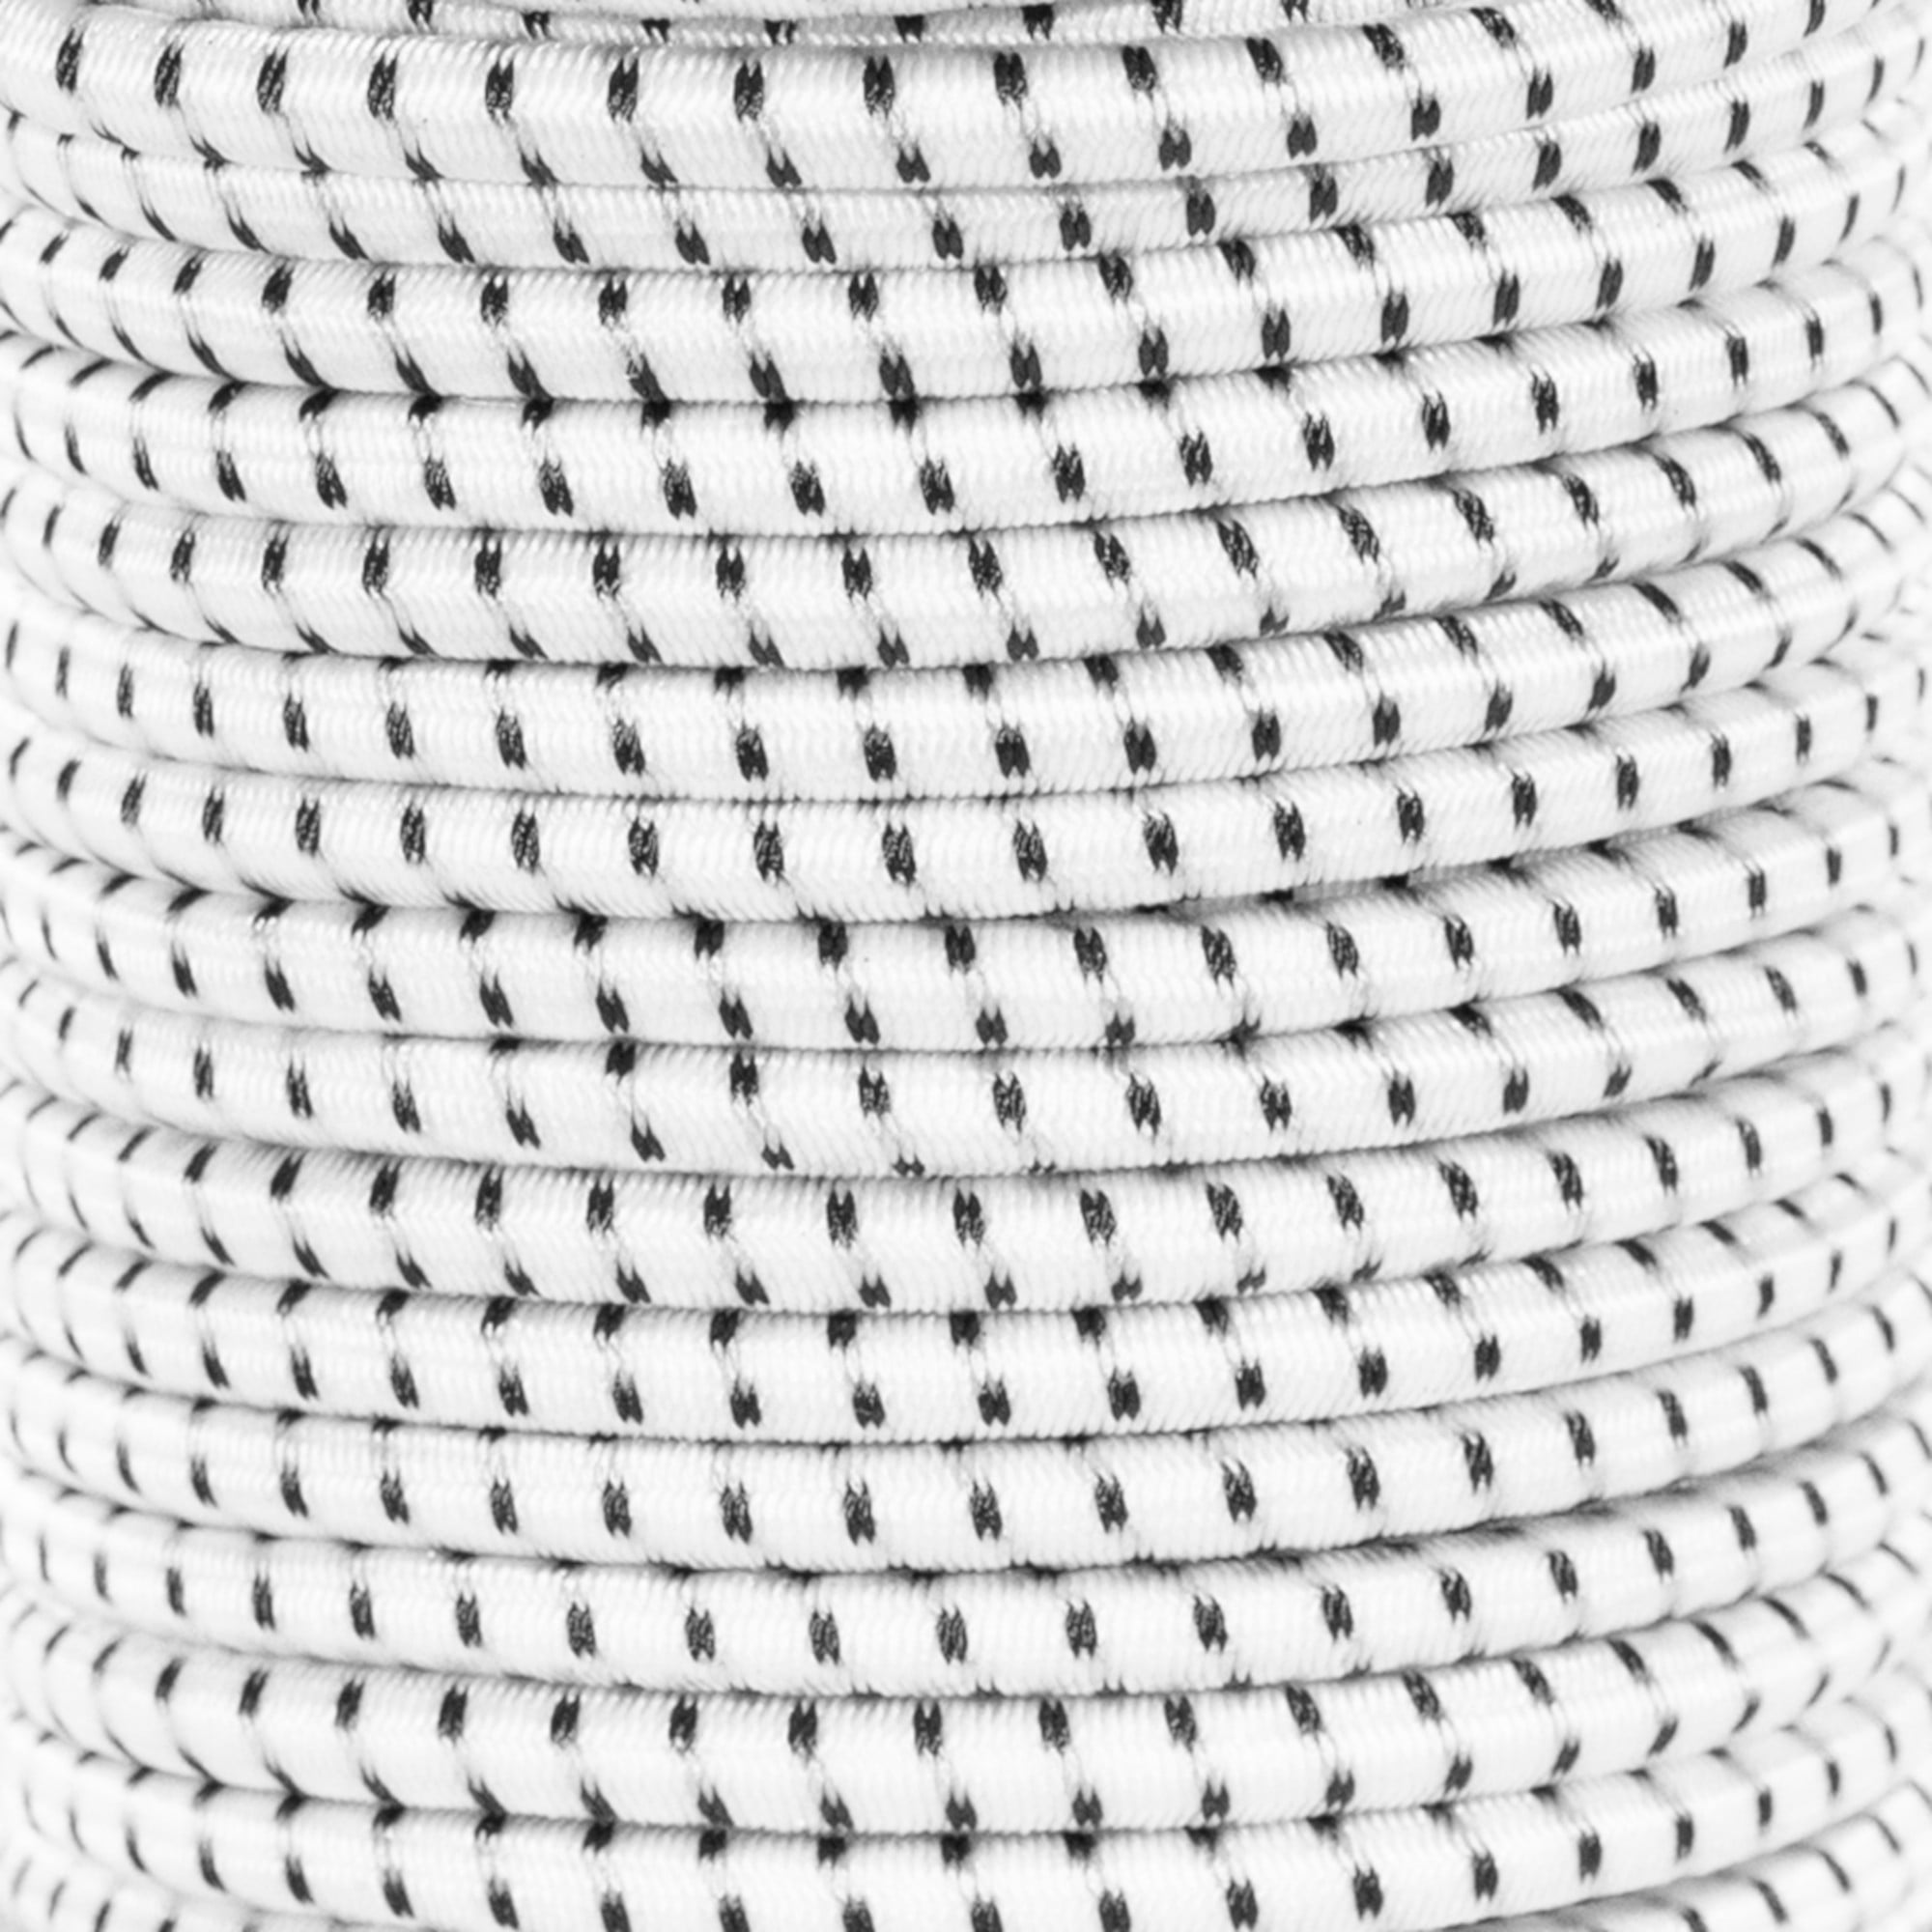 Paracord Planet Elastic Shock Absorbent True-Quality Standard Bungee Cord Available in 1/8 Crafts 3/16 5/16 Great for Use in Work Art and Repairs 1/4 and 1/2 Inch Diameters 3/8 Utility 